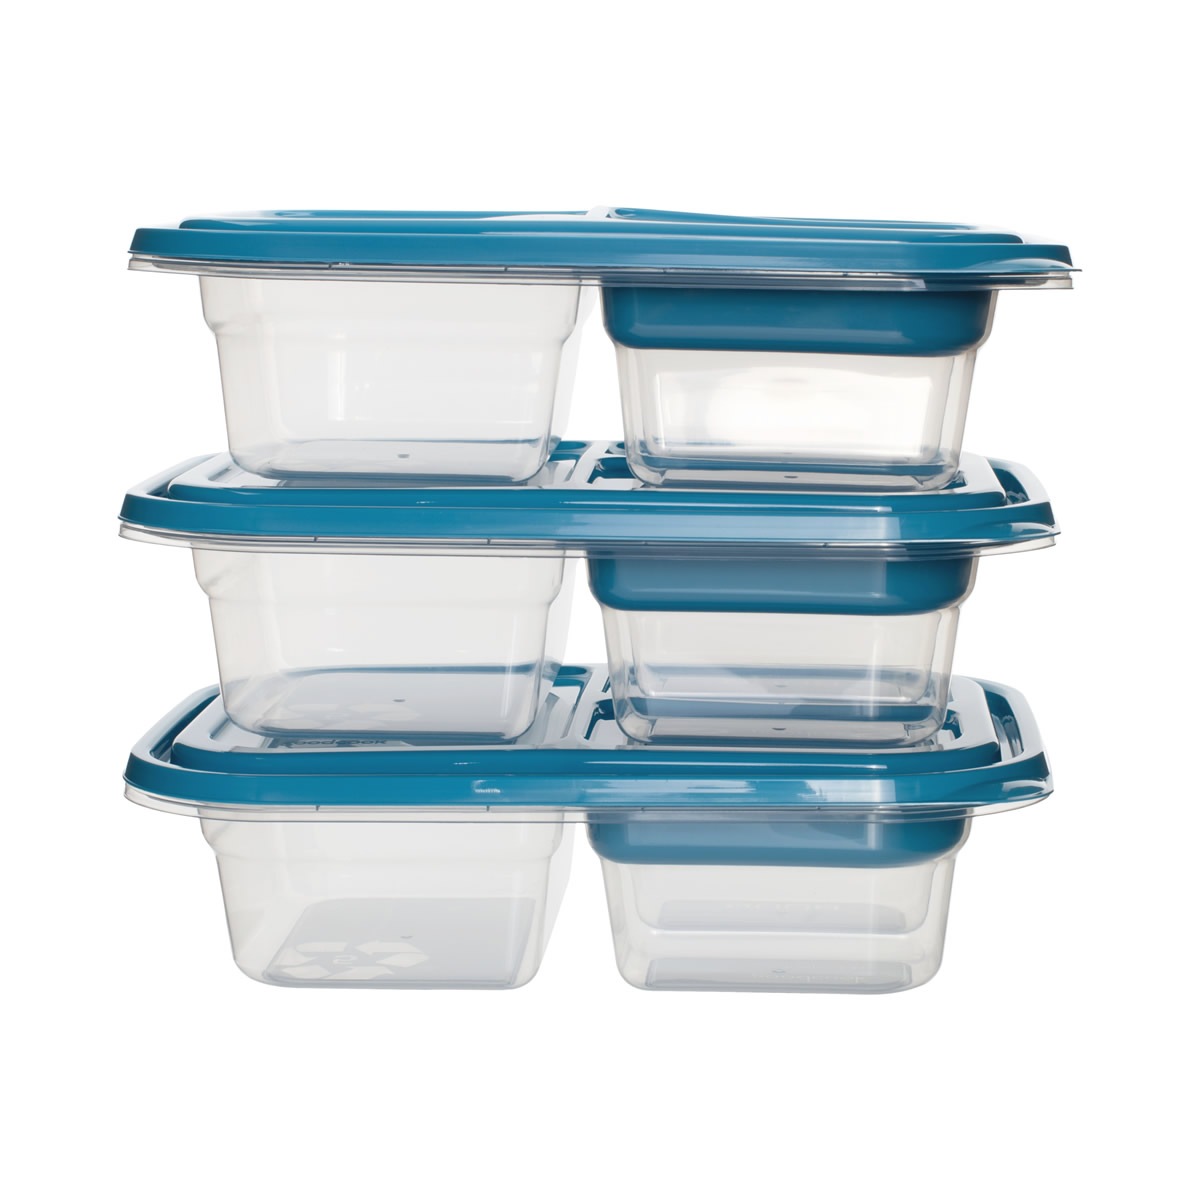 MONKA Bento Lunch Box Food Container Storage Set (3 In 1) – Monka Brand